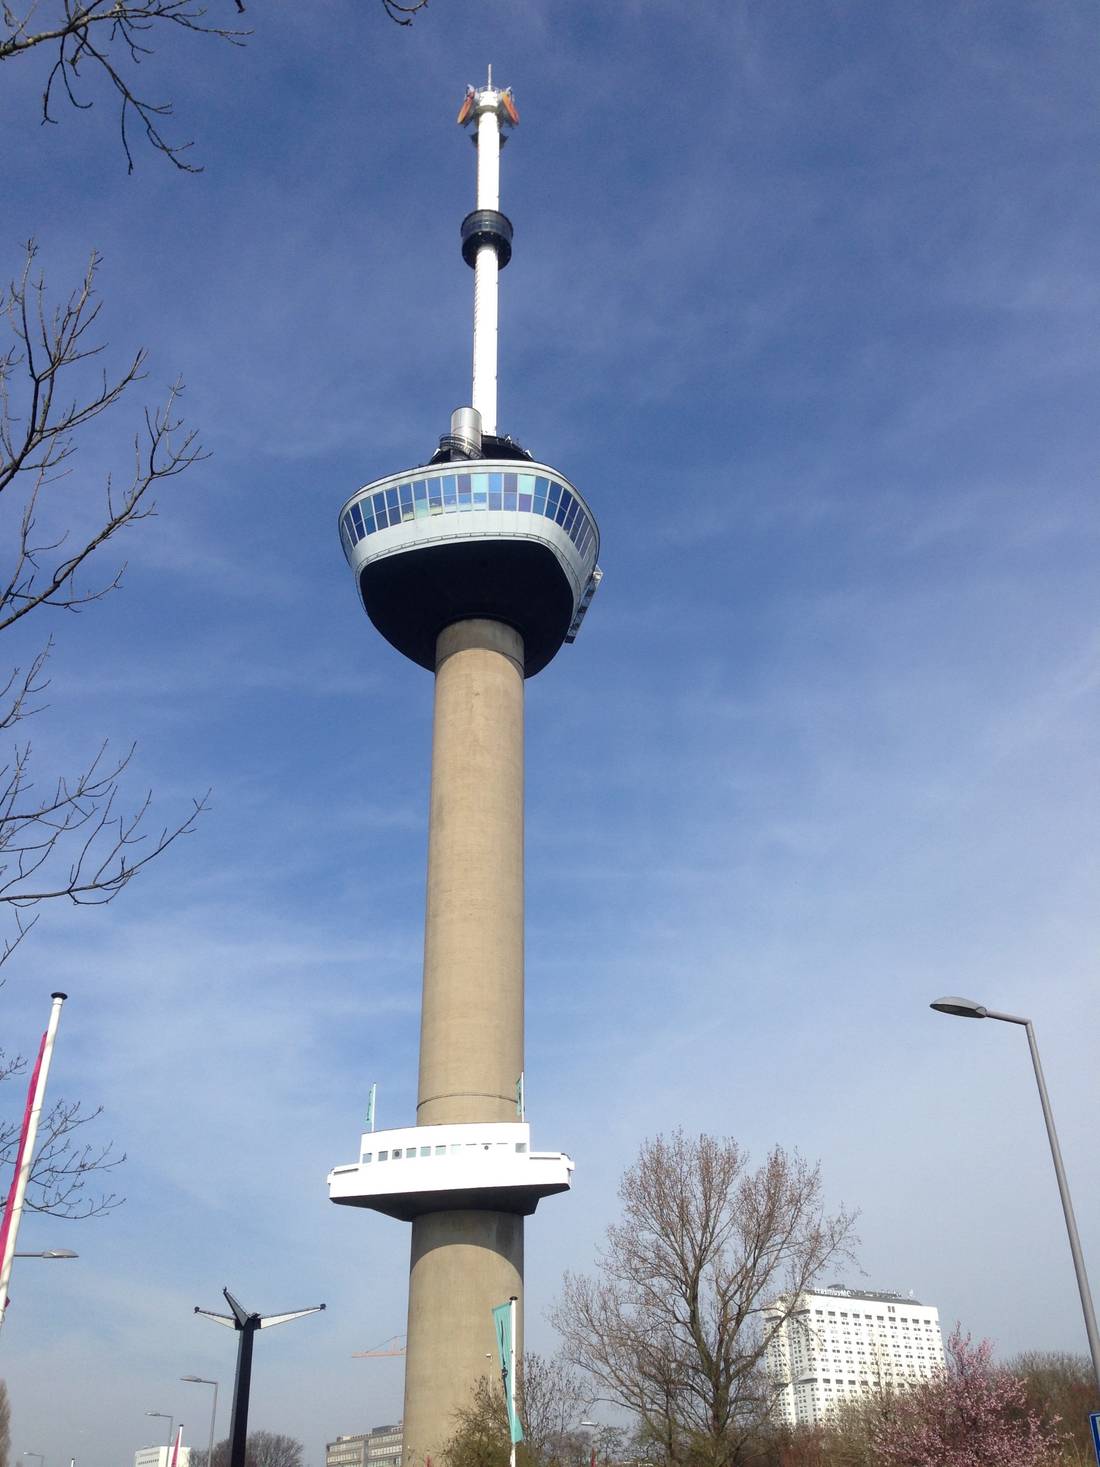 The Euromast tower. Once build for a world exibition